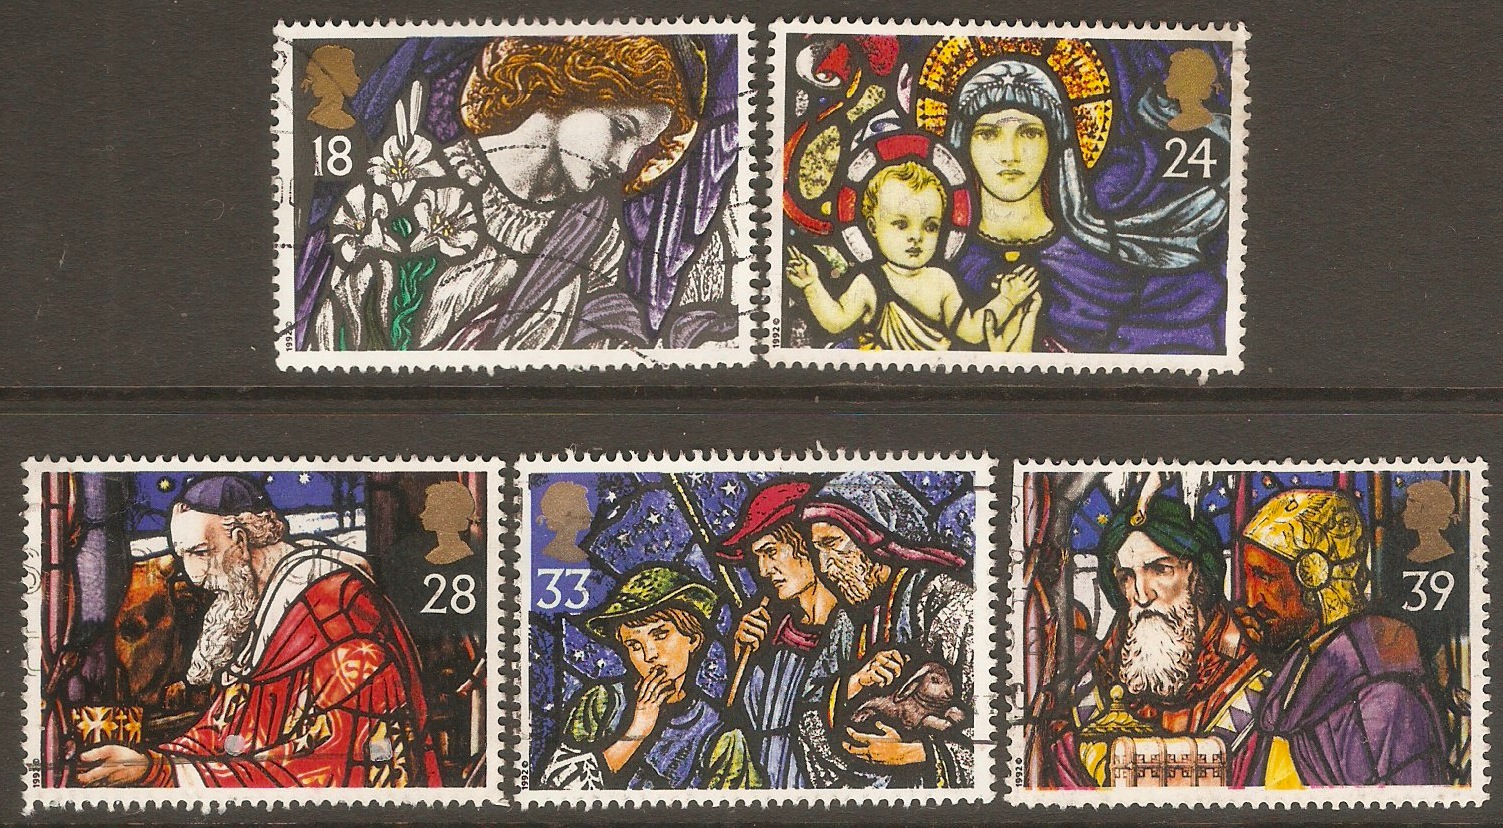 Great Britain 1992 Christmas - Stained Glass set. SG1634-SG1638.